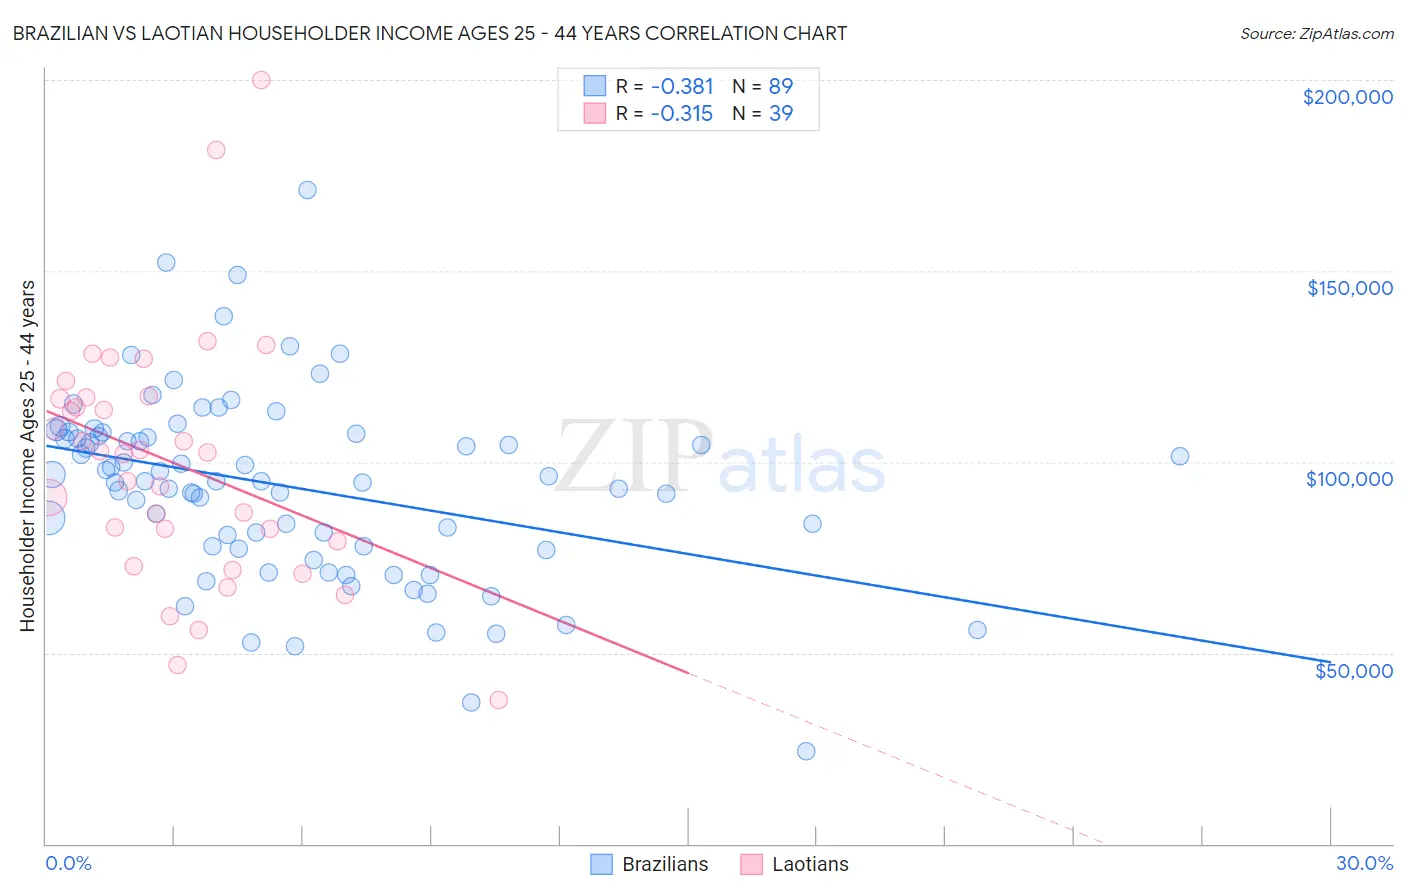 Brazilian vs Laotian Householder Income Ages 25 - 44 years